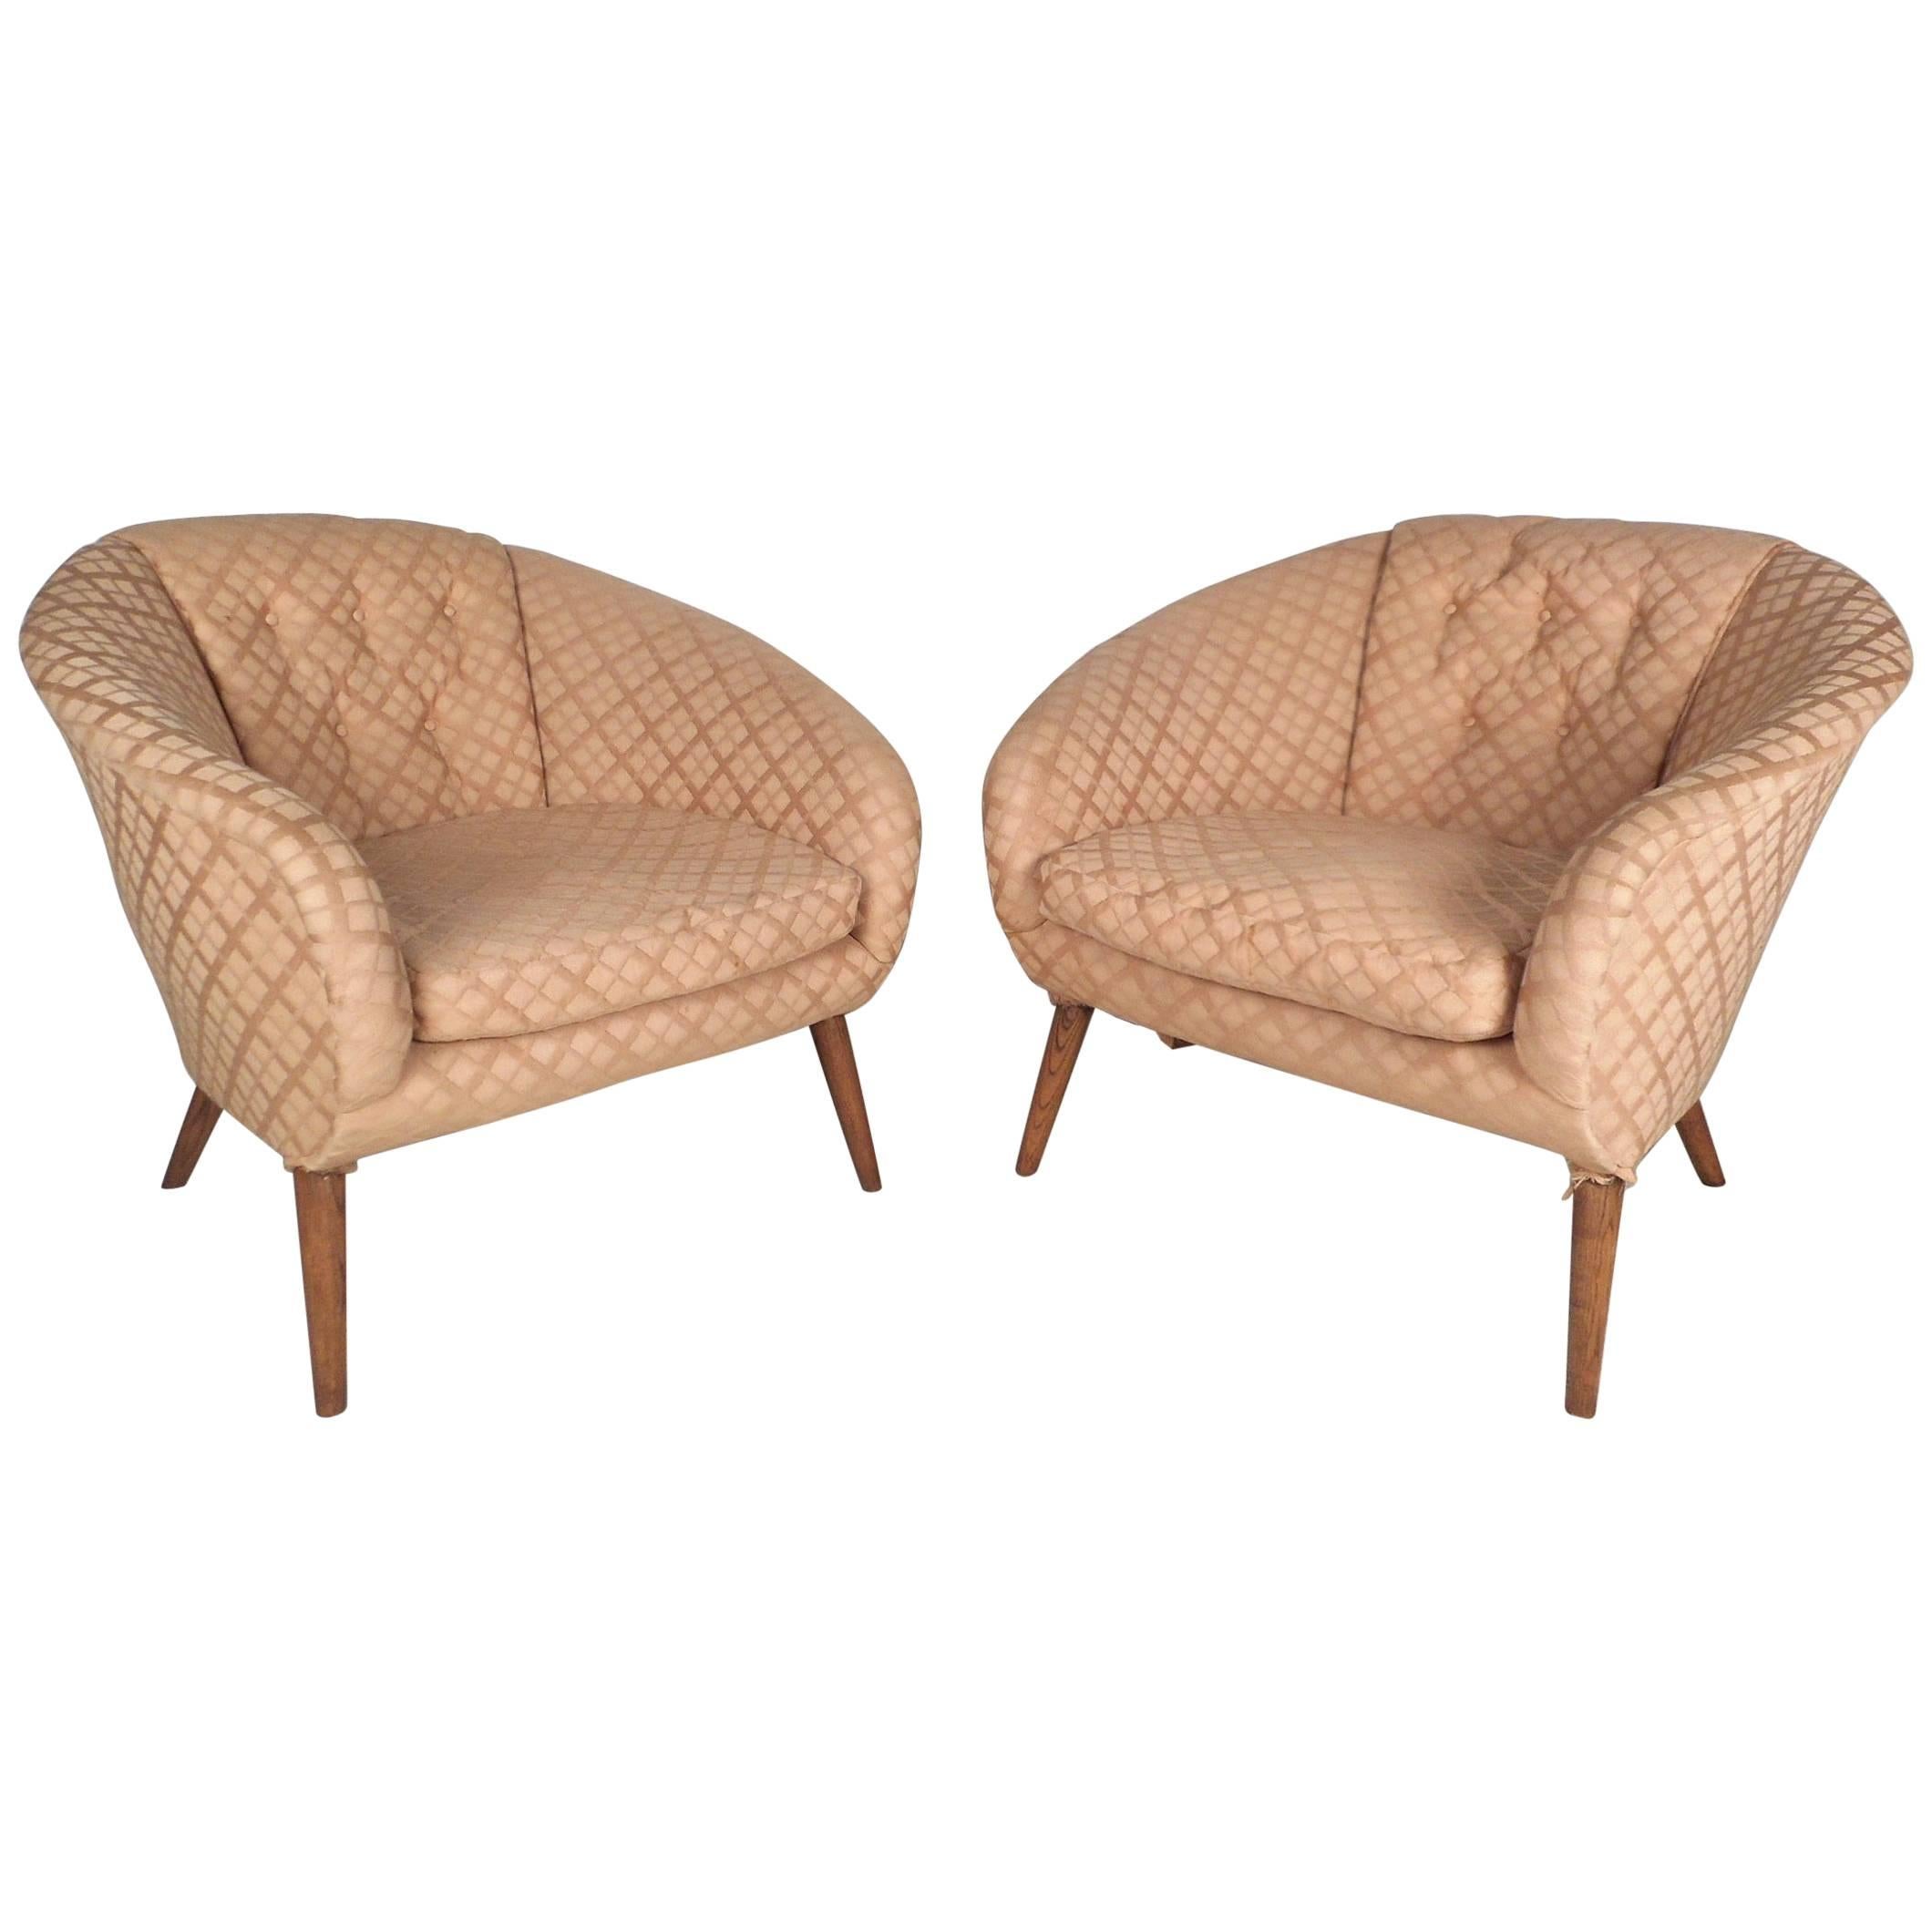 Mid-Century Modern Barrel Back Tufted Lounge Chairs